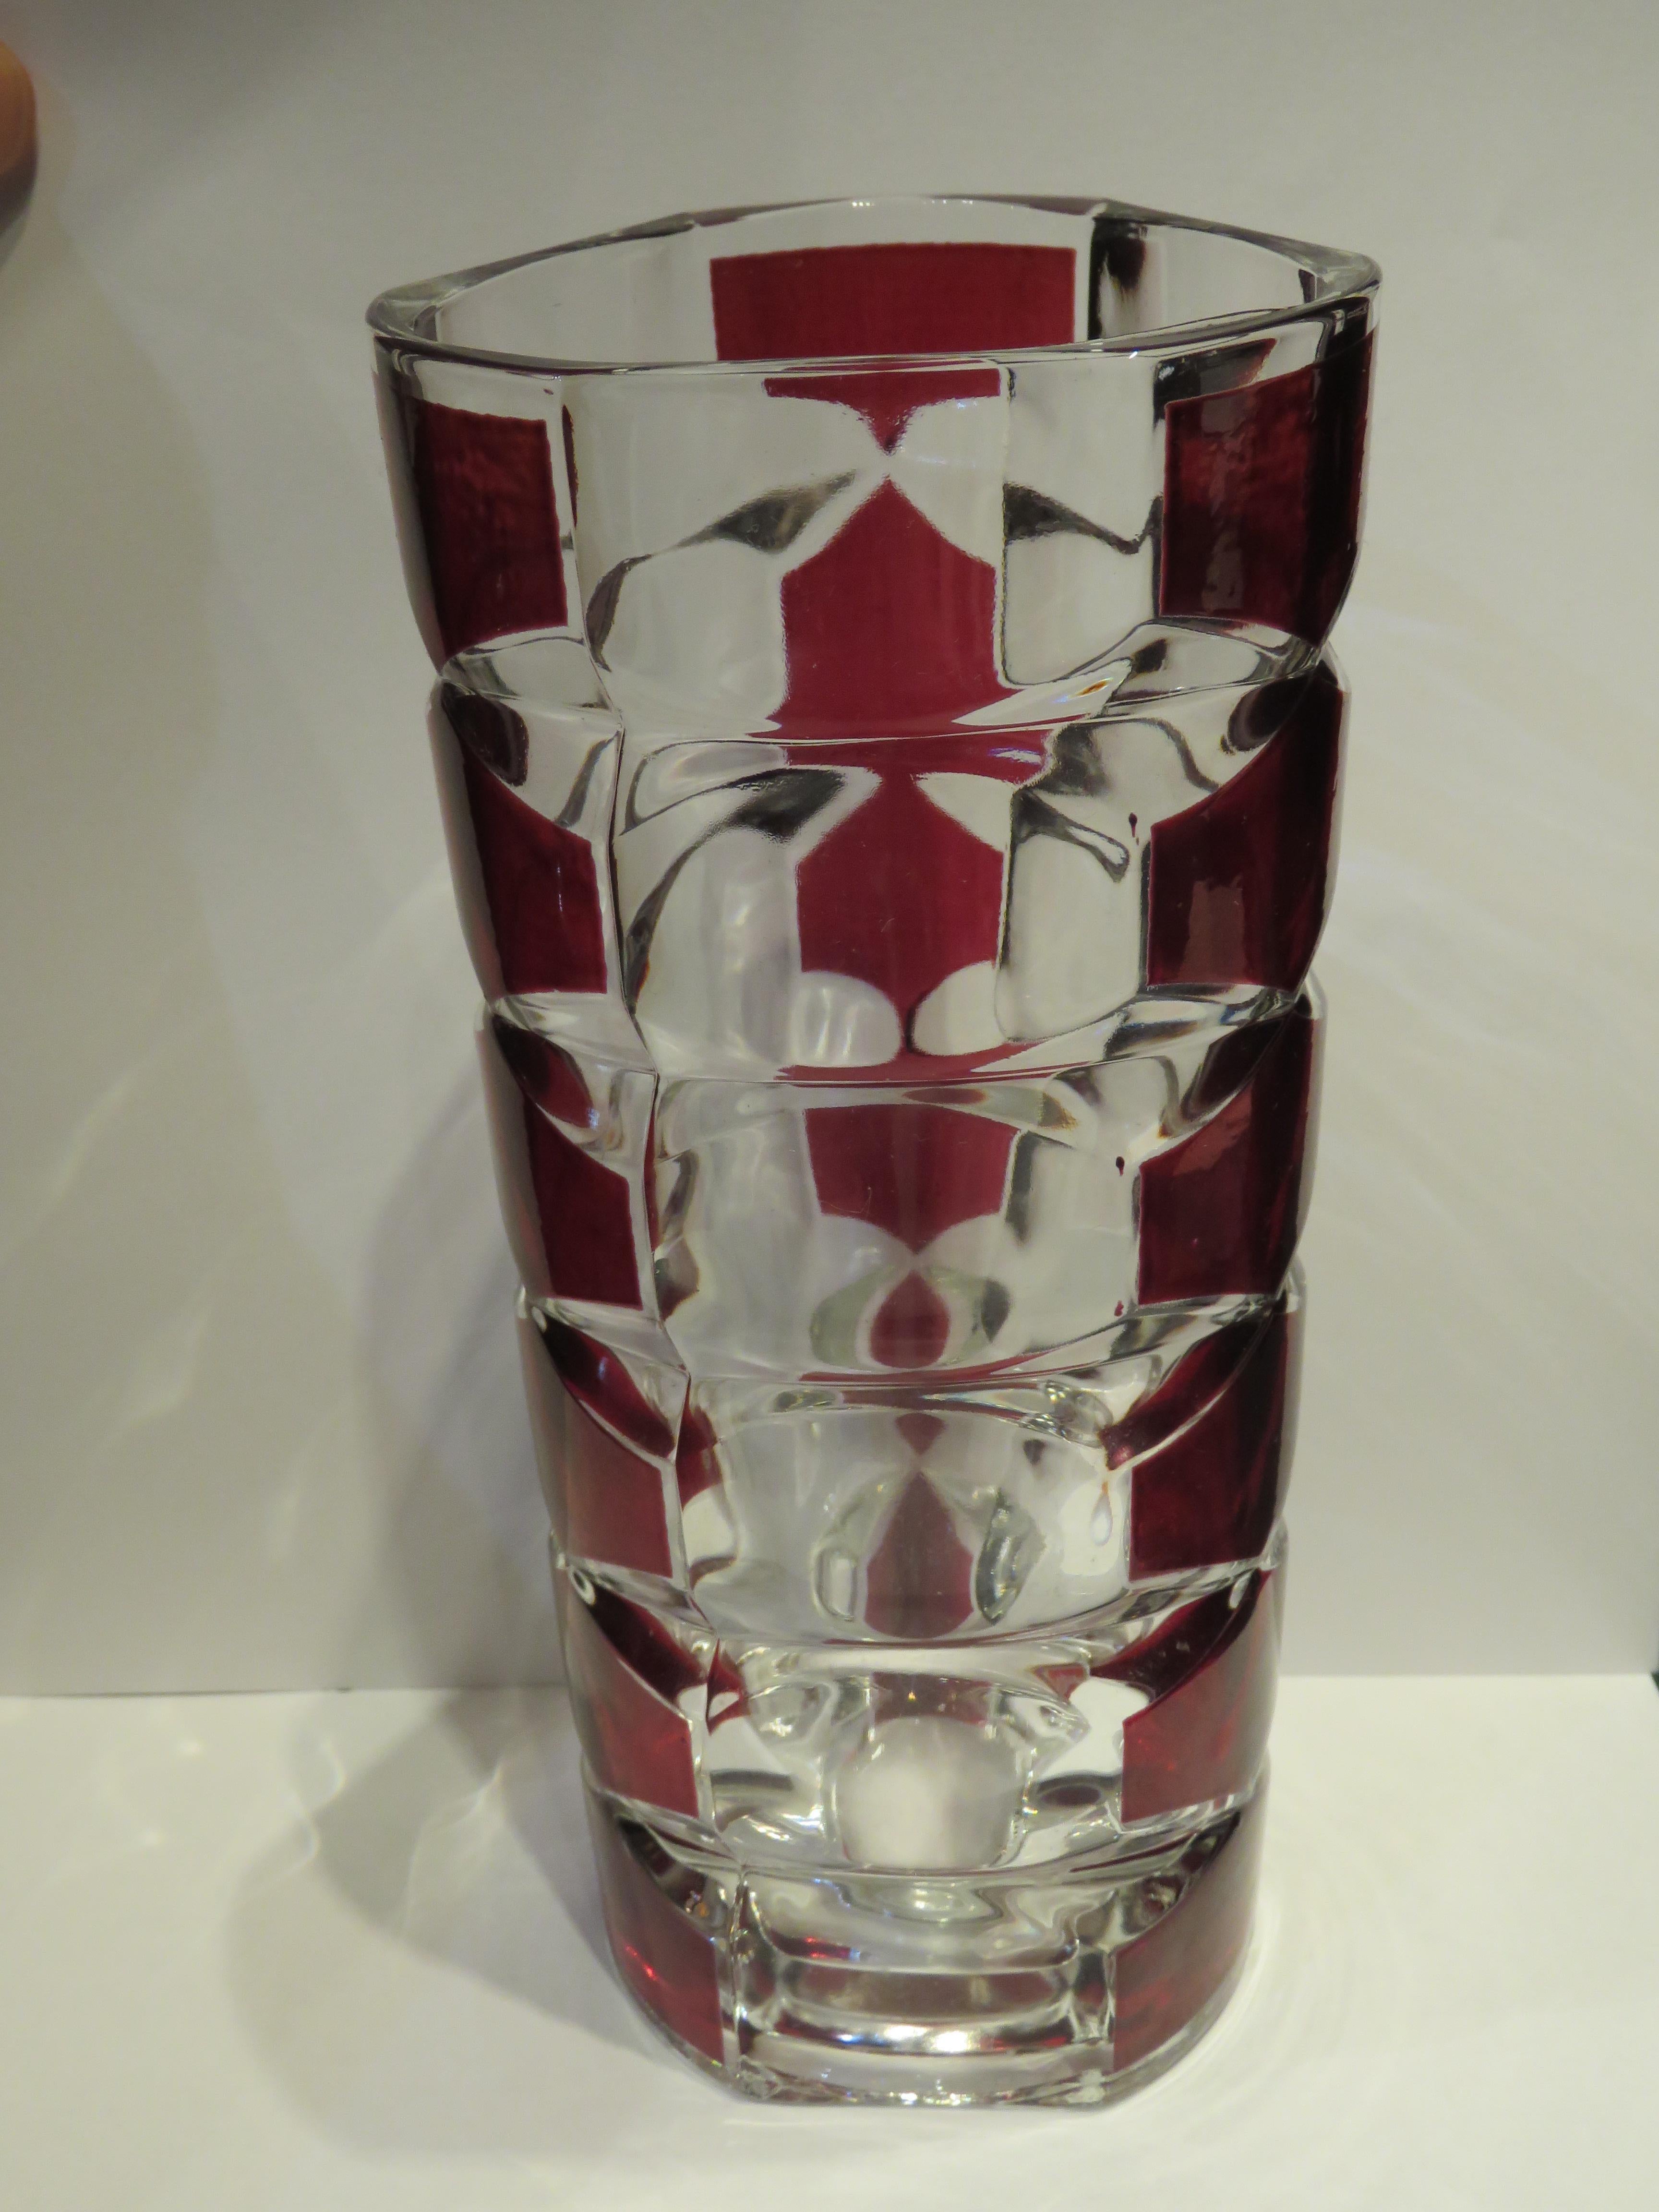 A Magnificent Rare 19th Century Gorgeous Cranberry to Clear Crystal Floral Flower Vase Attributed to Bacarrat. Magnificently done in Red to Clear. STAMPED FRANCE ON BOTTOM!! A Masterpiece!!
TAKEN OUT OF A MILLION DOLLAR BROOKLYN, NY ESTATE
Approx 7